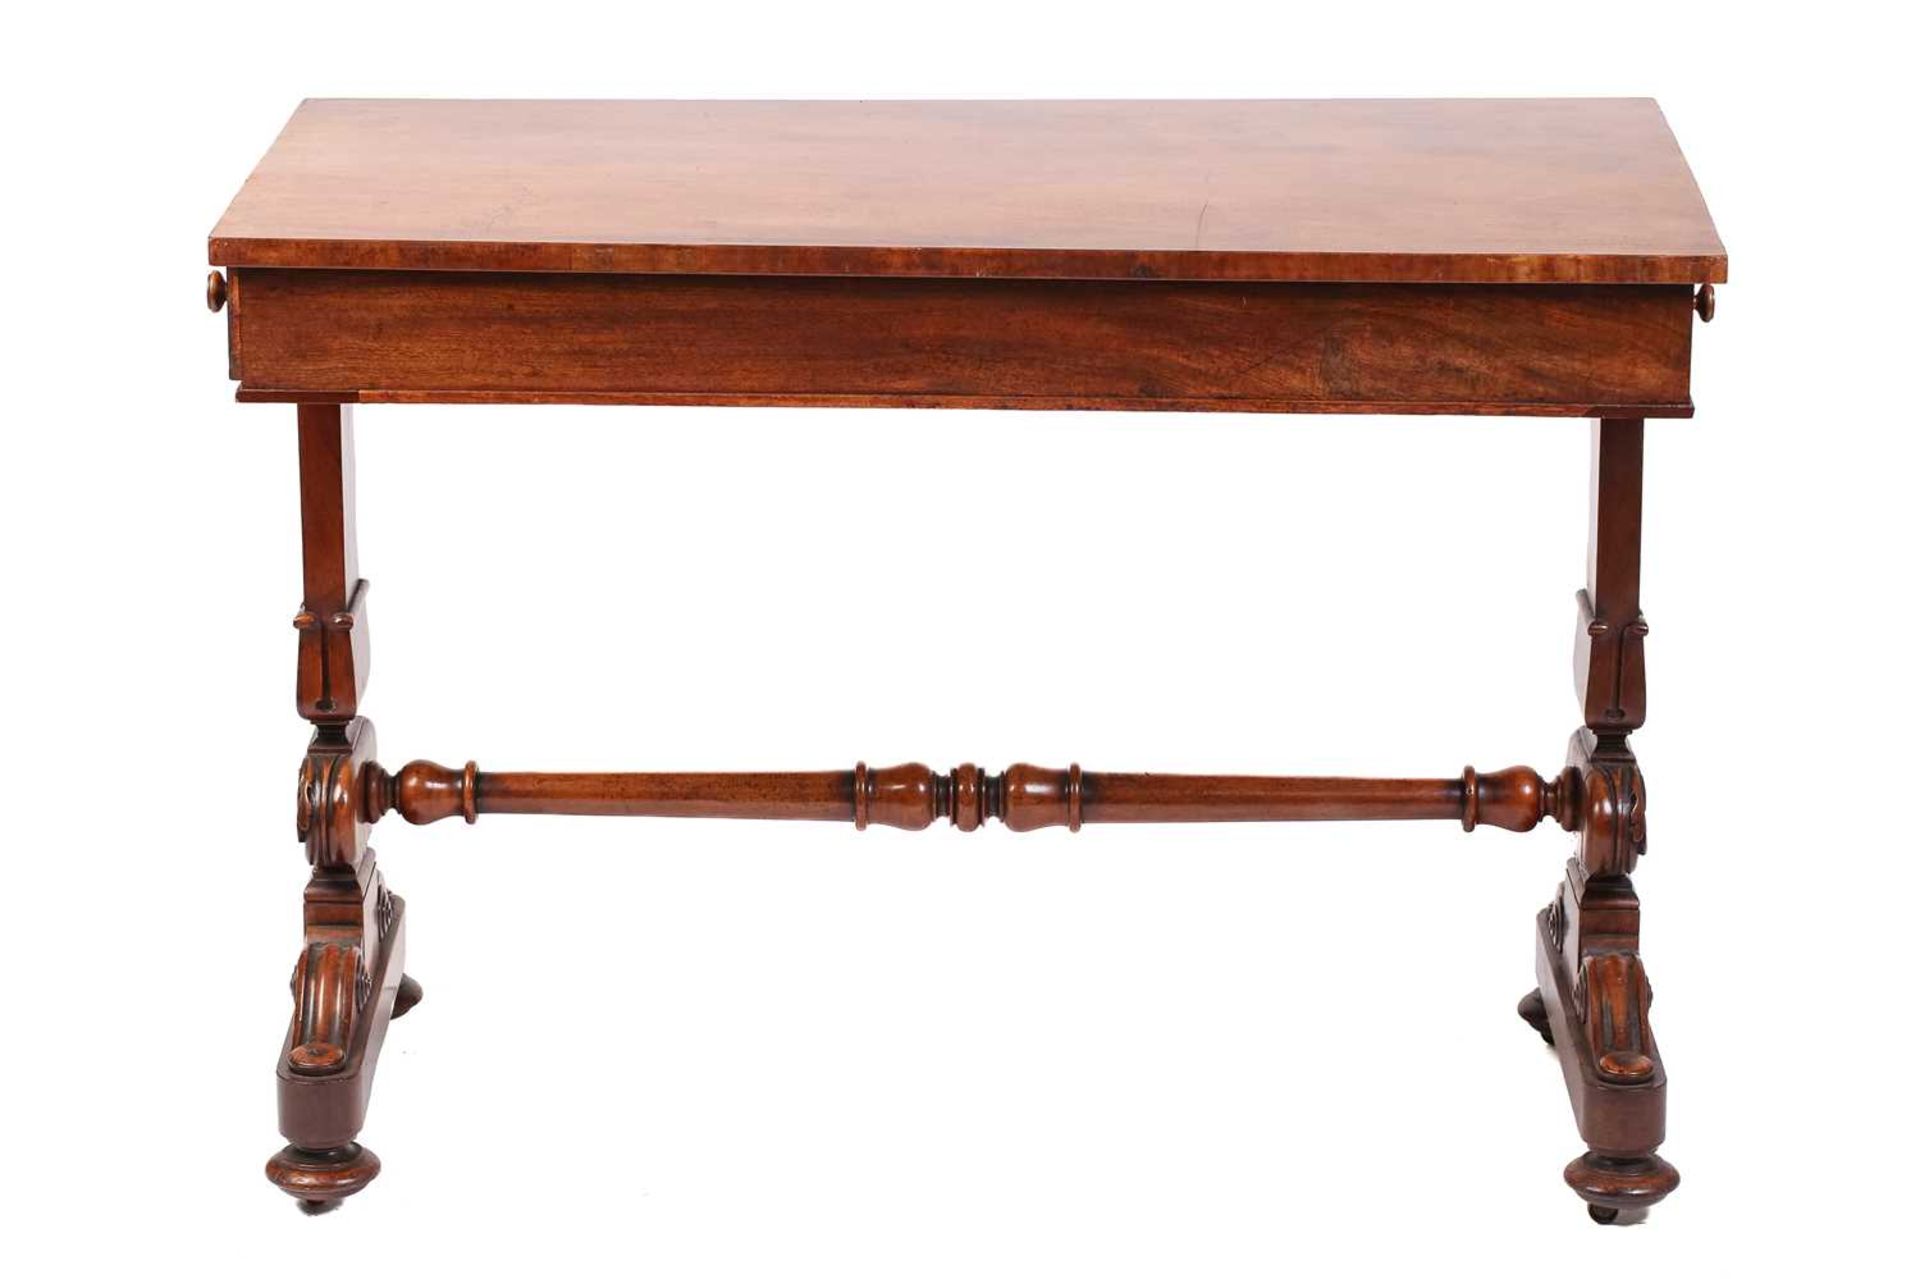 An early Victorian mahogany rectangular side table with unusually configured end frieze drawers on - Image 7 of 8